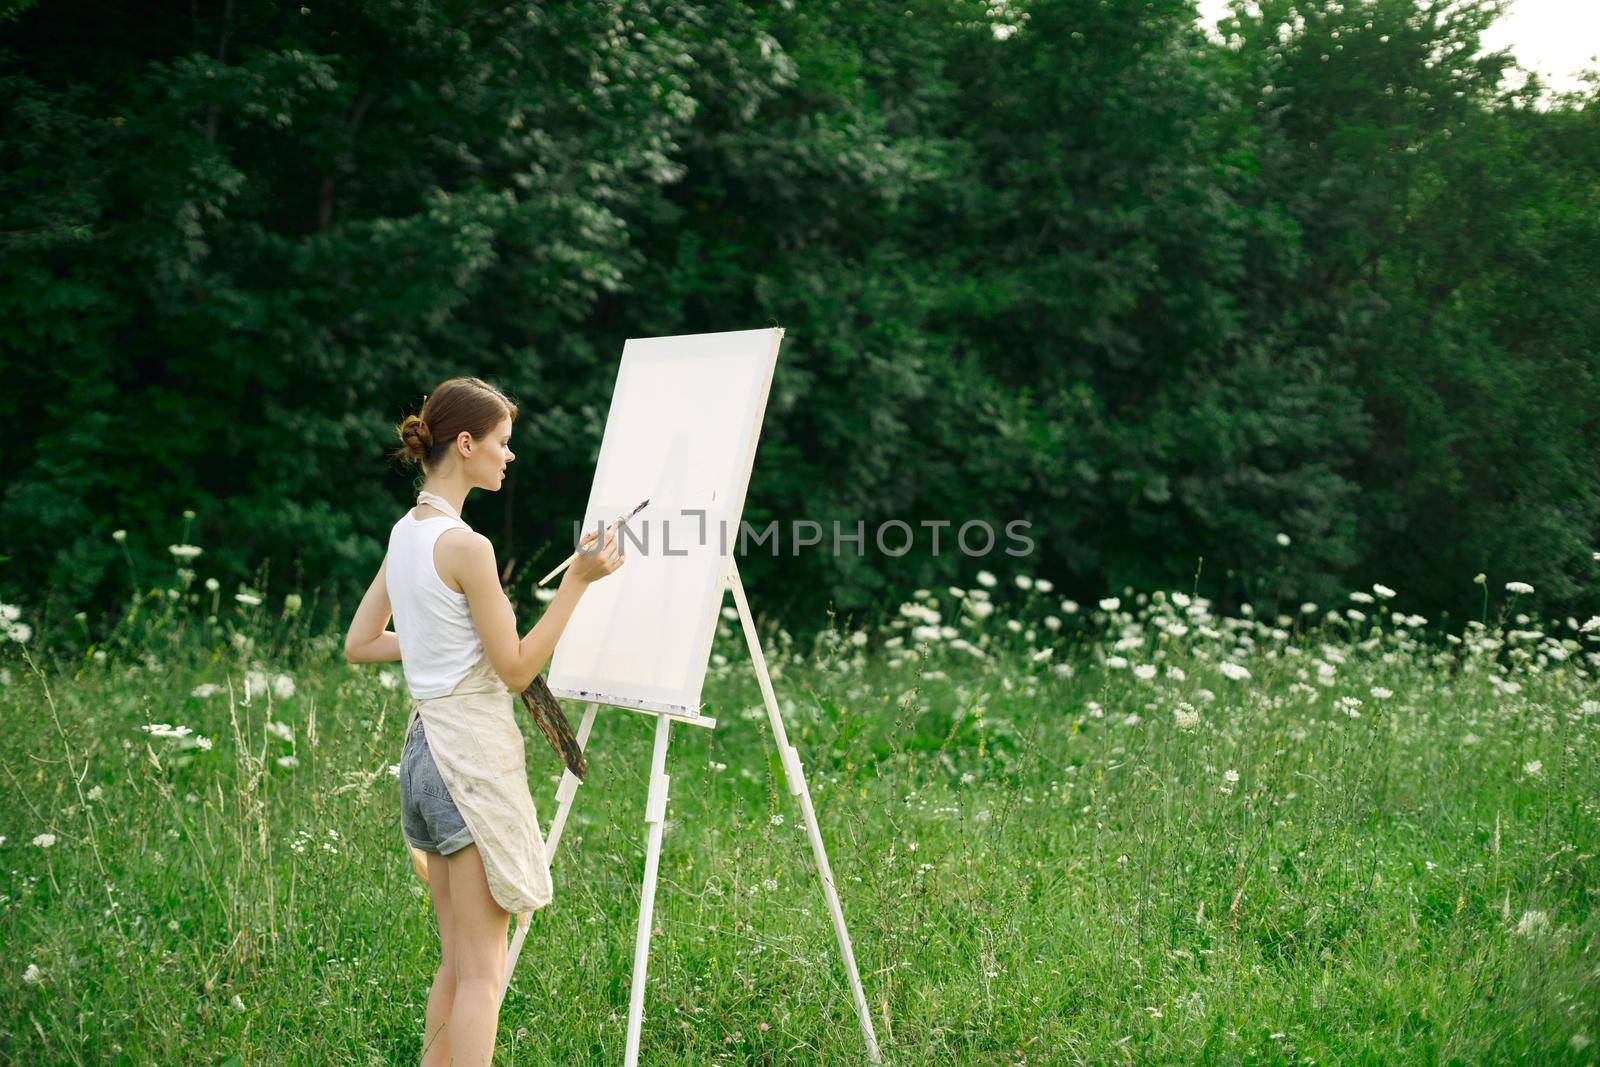 woman artist drawing landscape nature drawing creative. High quality photo